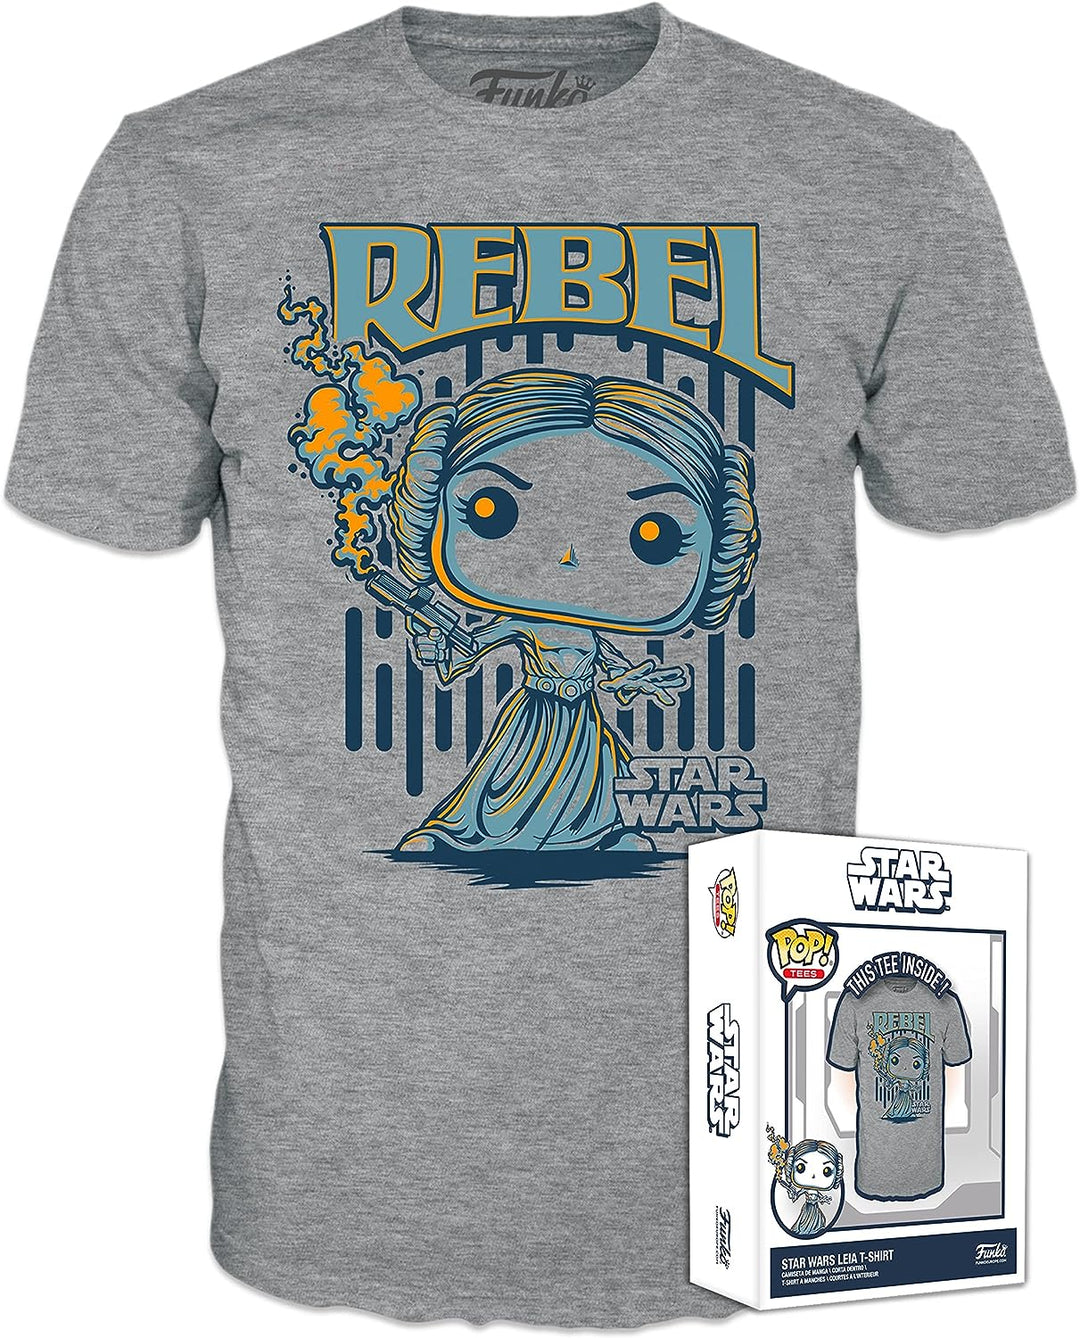 Funko Boxed Tee: Star Wars - Leia - Large - (L) - T-Shirt - Clothes - Gift Idea - Short Sleeve Top for Adults Unisex Men and Women